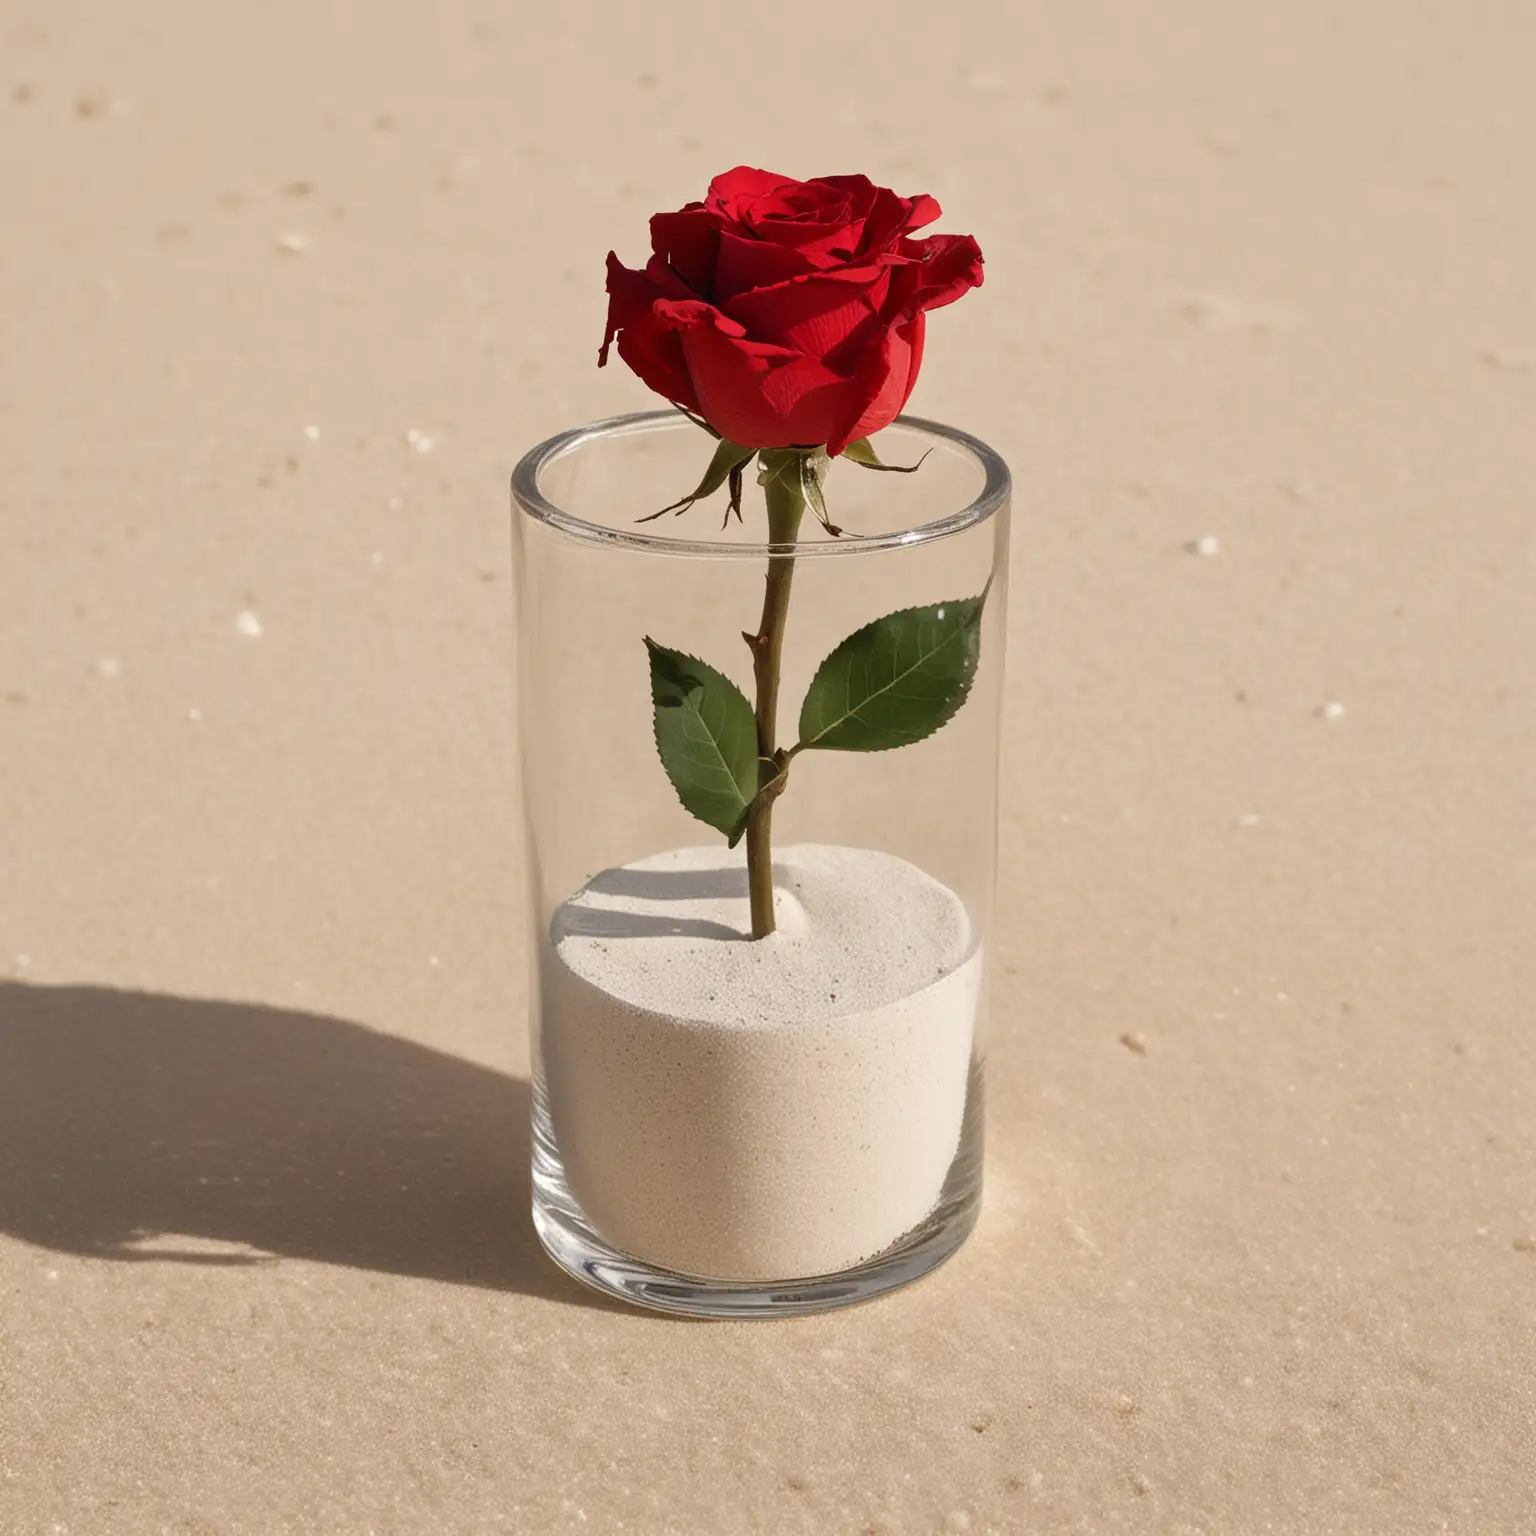 Minimalist-Glass-Vase-with-Red-Rose-in-White-Sand